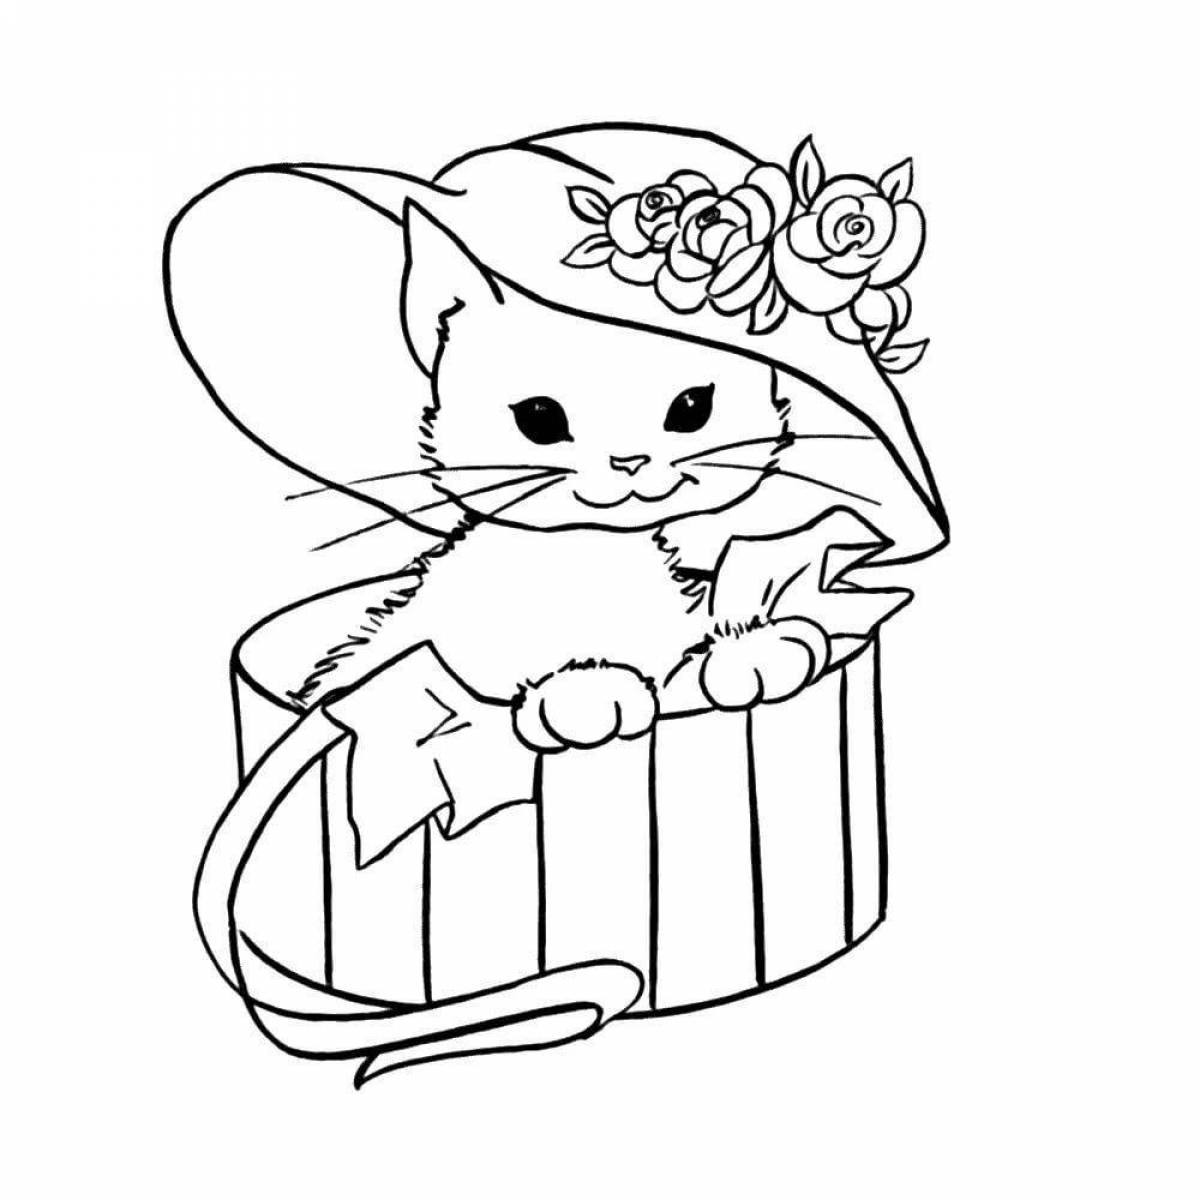 Coloring book witty kittens